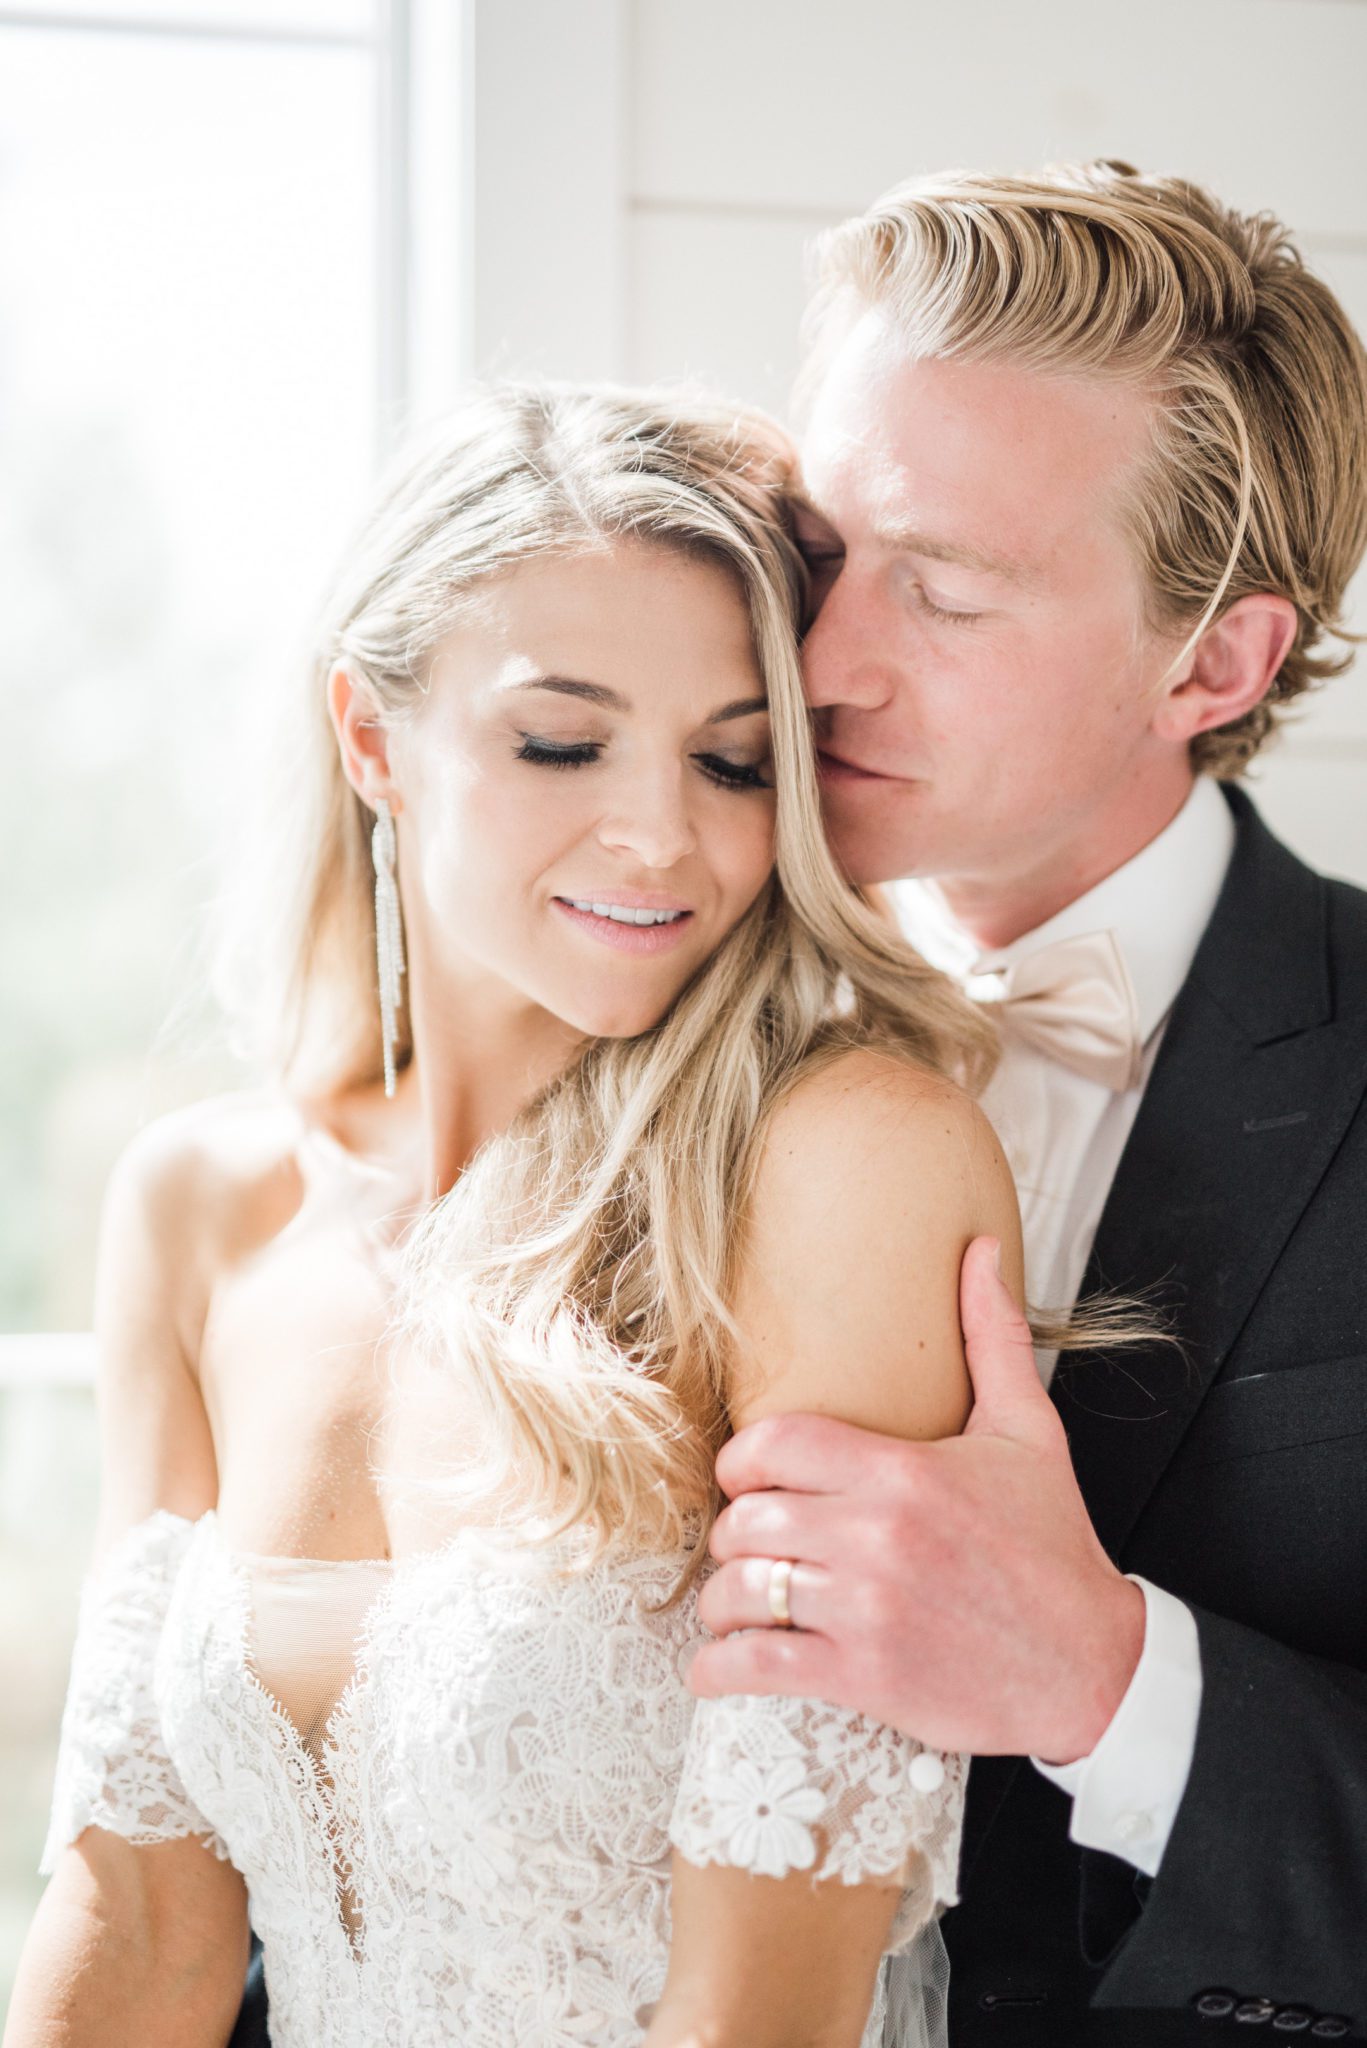 Wedding day attire inspiration for the classic bride and groom